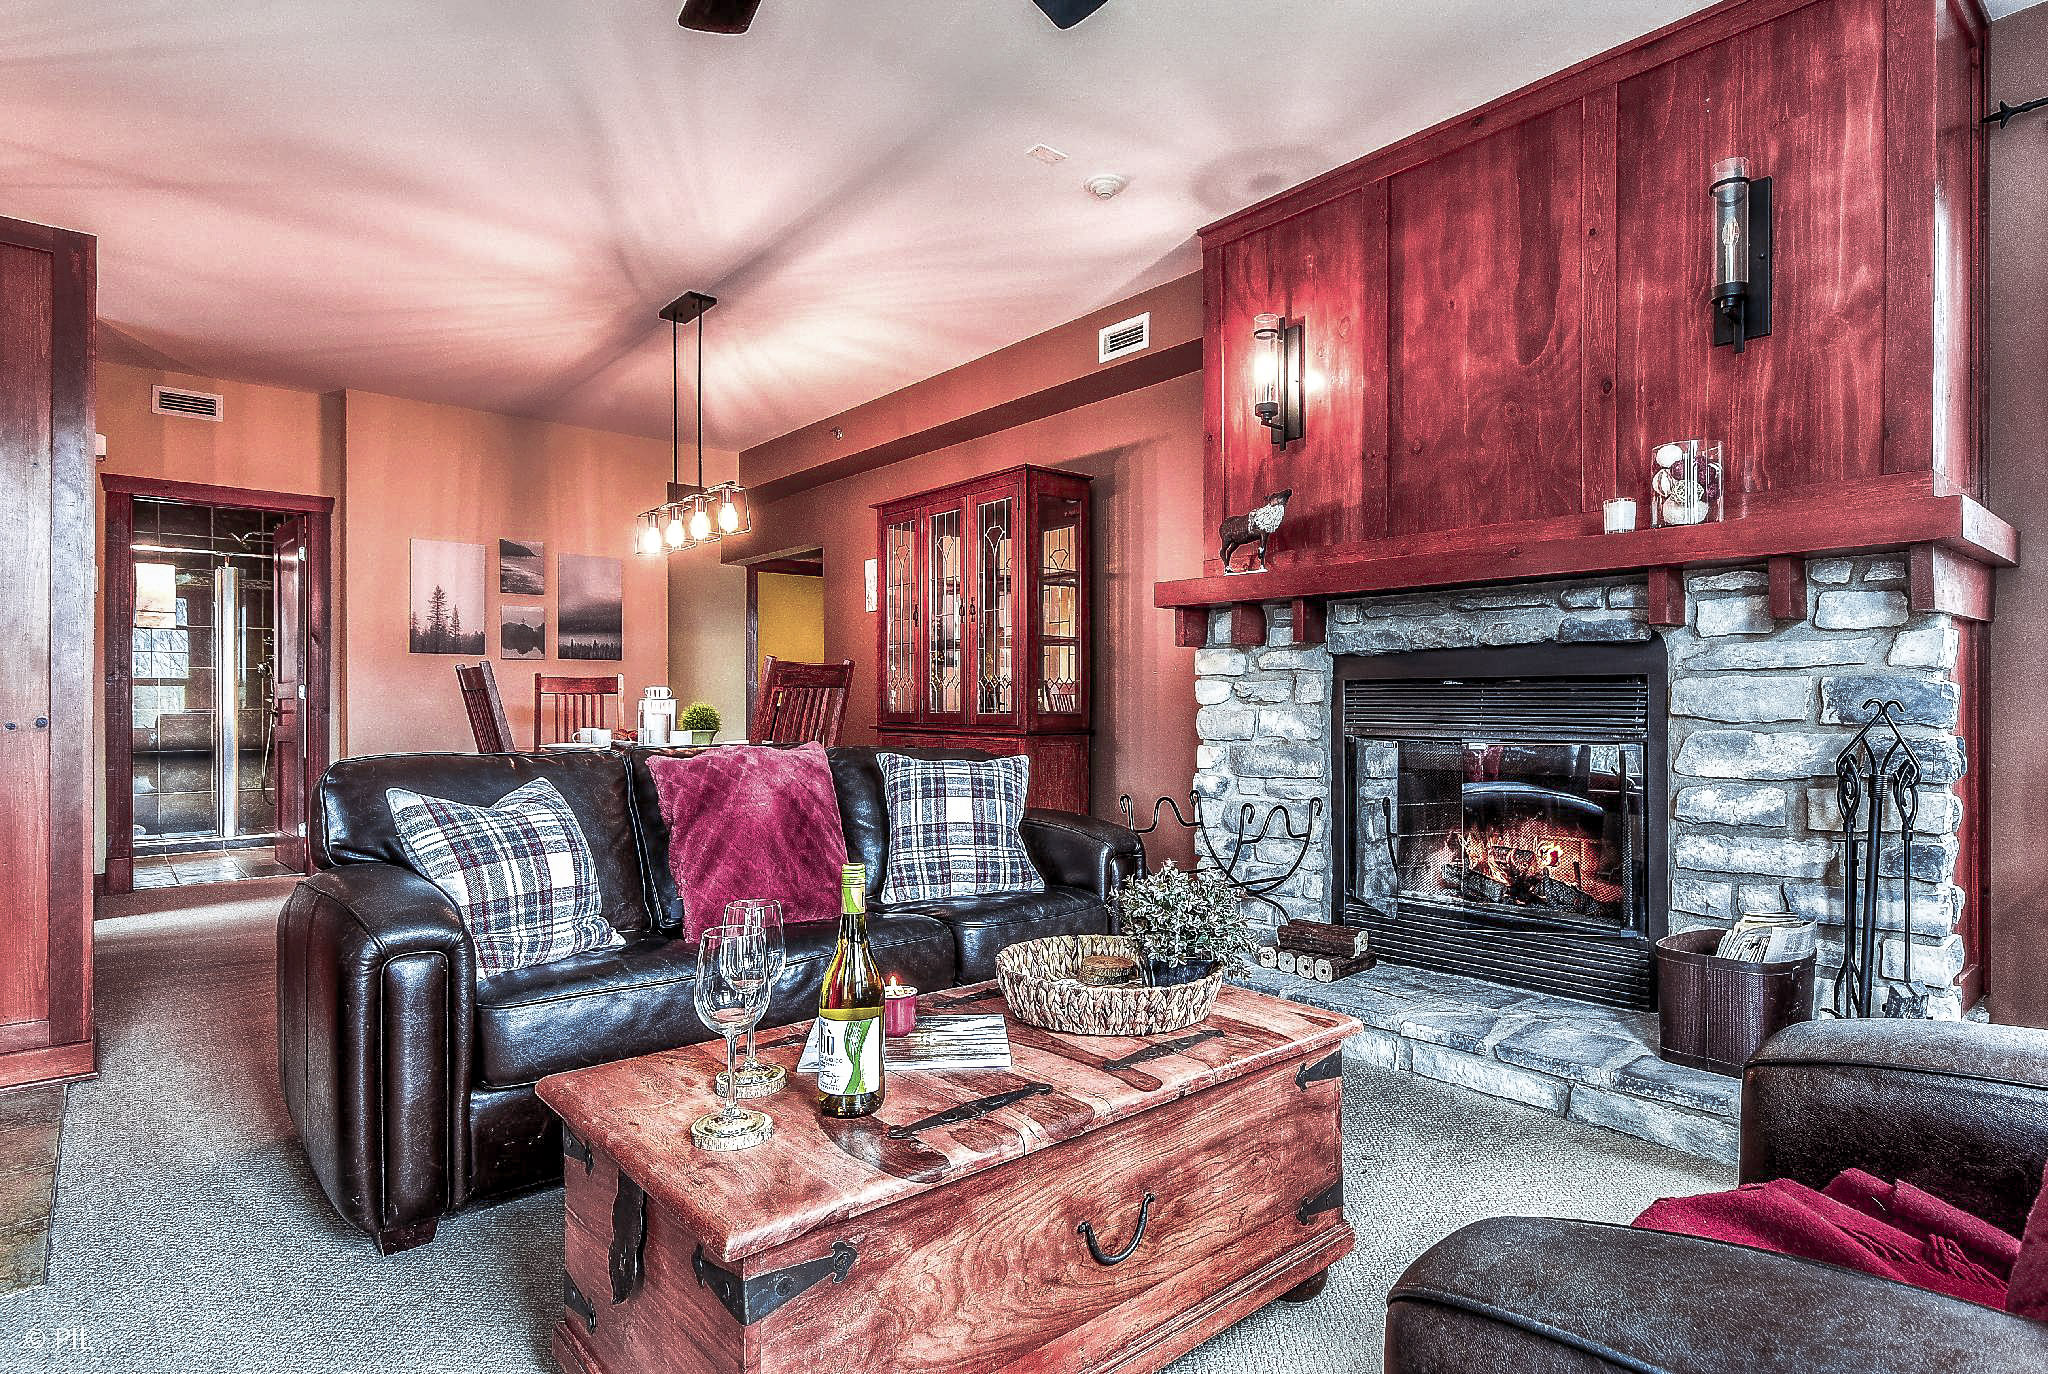 Property Image 1 - Tremblant Les Eaux - 2 Bedrooms with Pool and Hot Tub Access, near Pedestrian Village - The Zig Zag